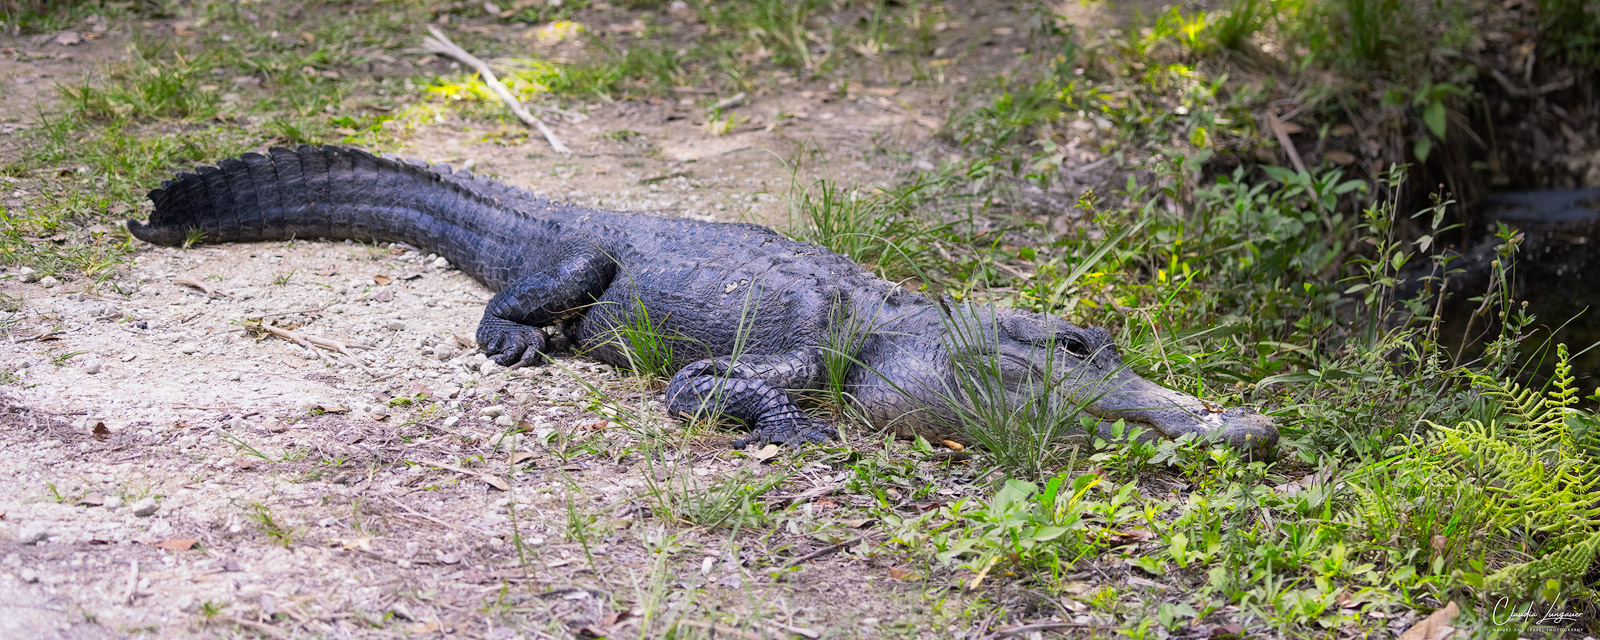 View of American Alligator in Everglades National Park in Florida.